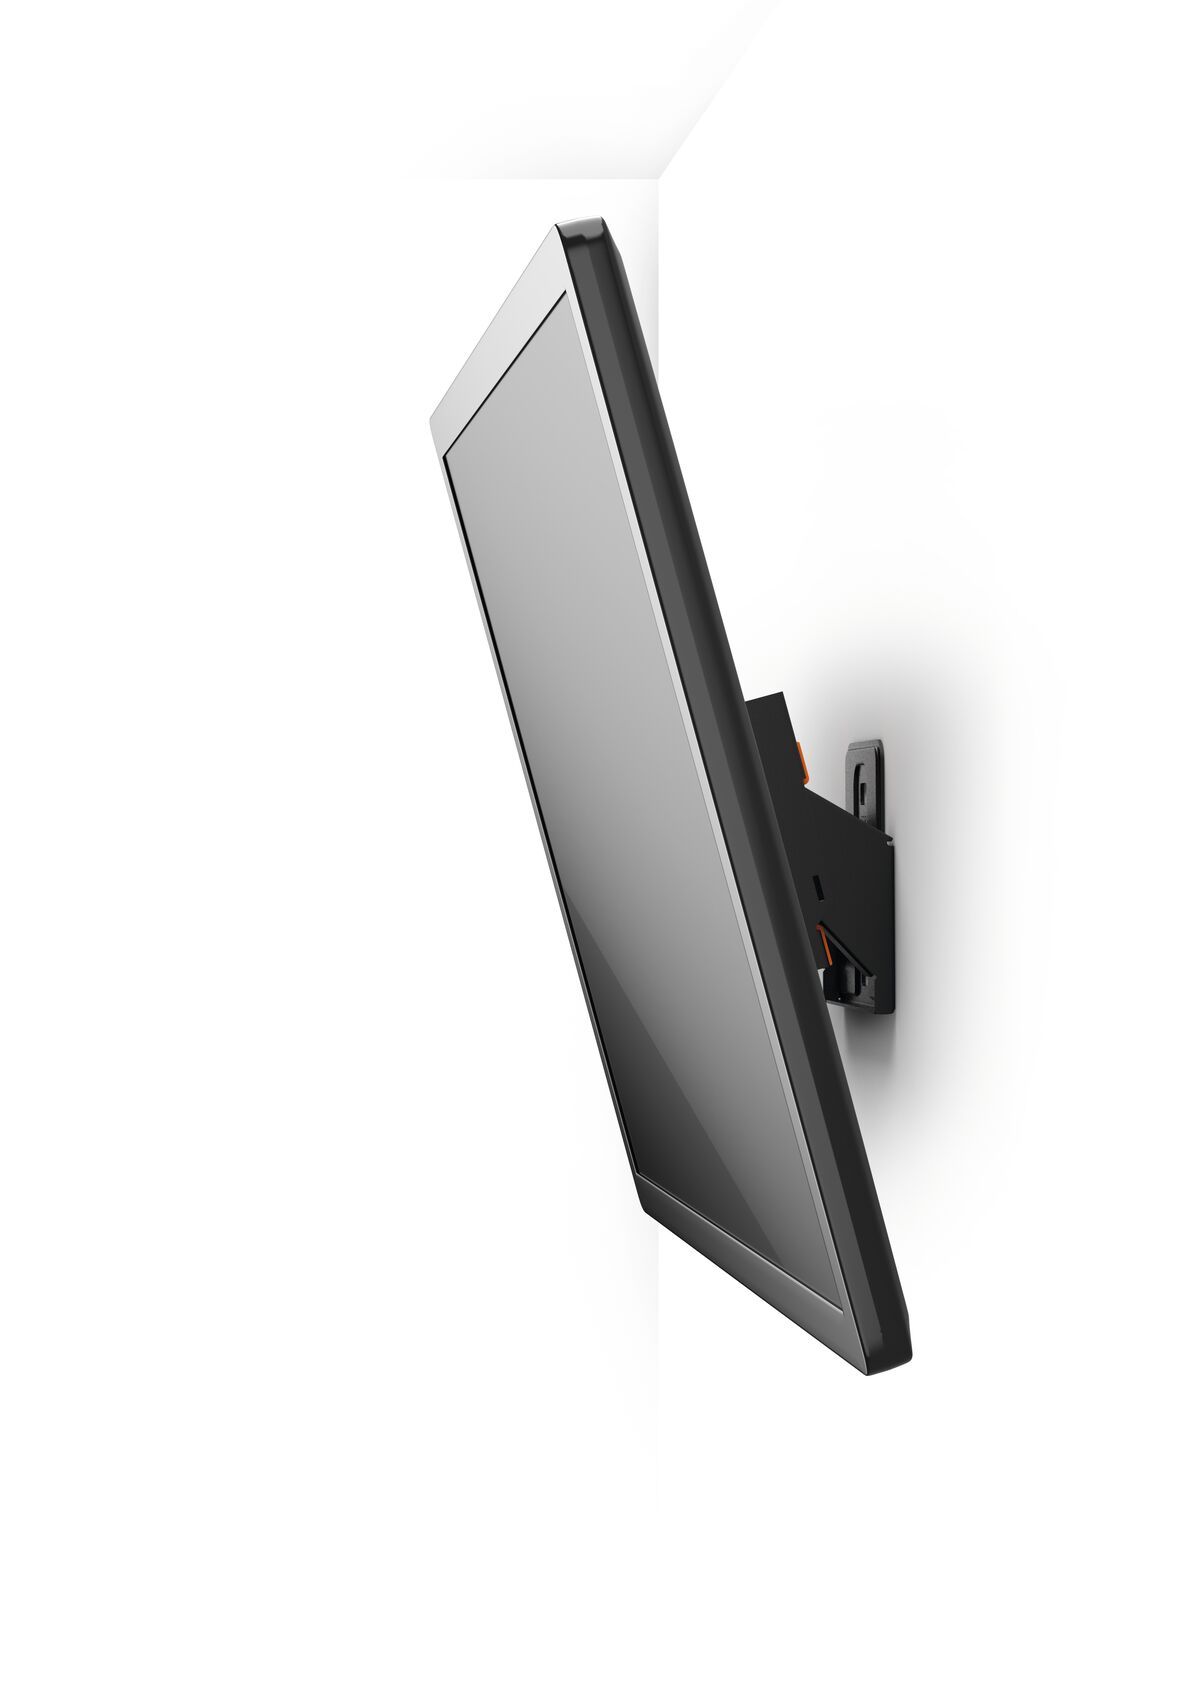 Vogel's WALL 2115 Tilting TV Wall Mount - Suitable for 19 up to 40 inch TVs up to Tilt up to 15° - White wall